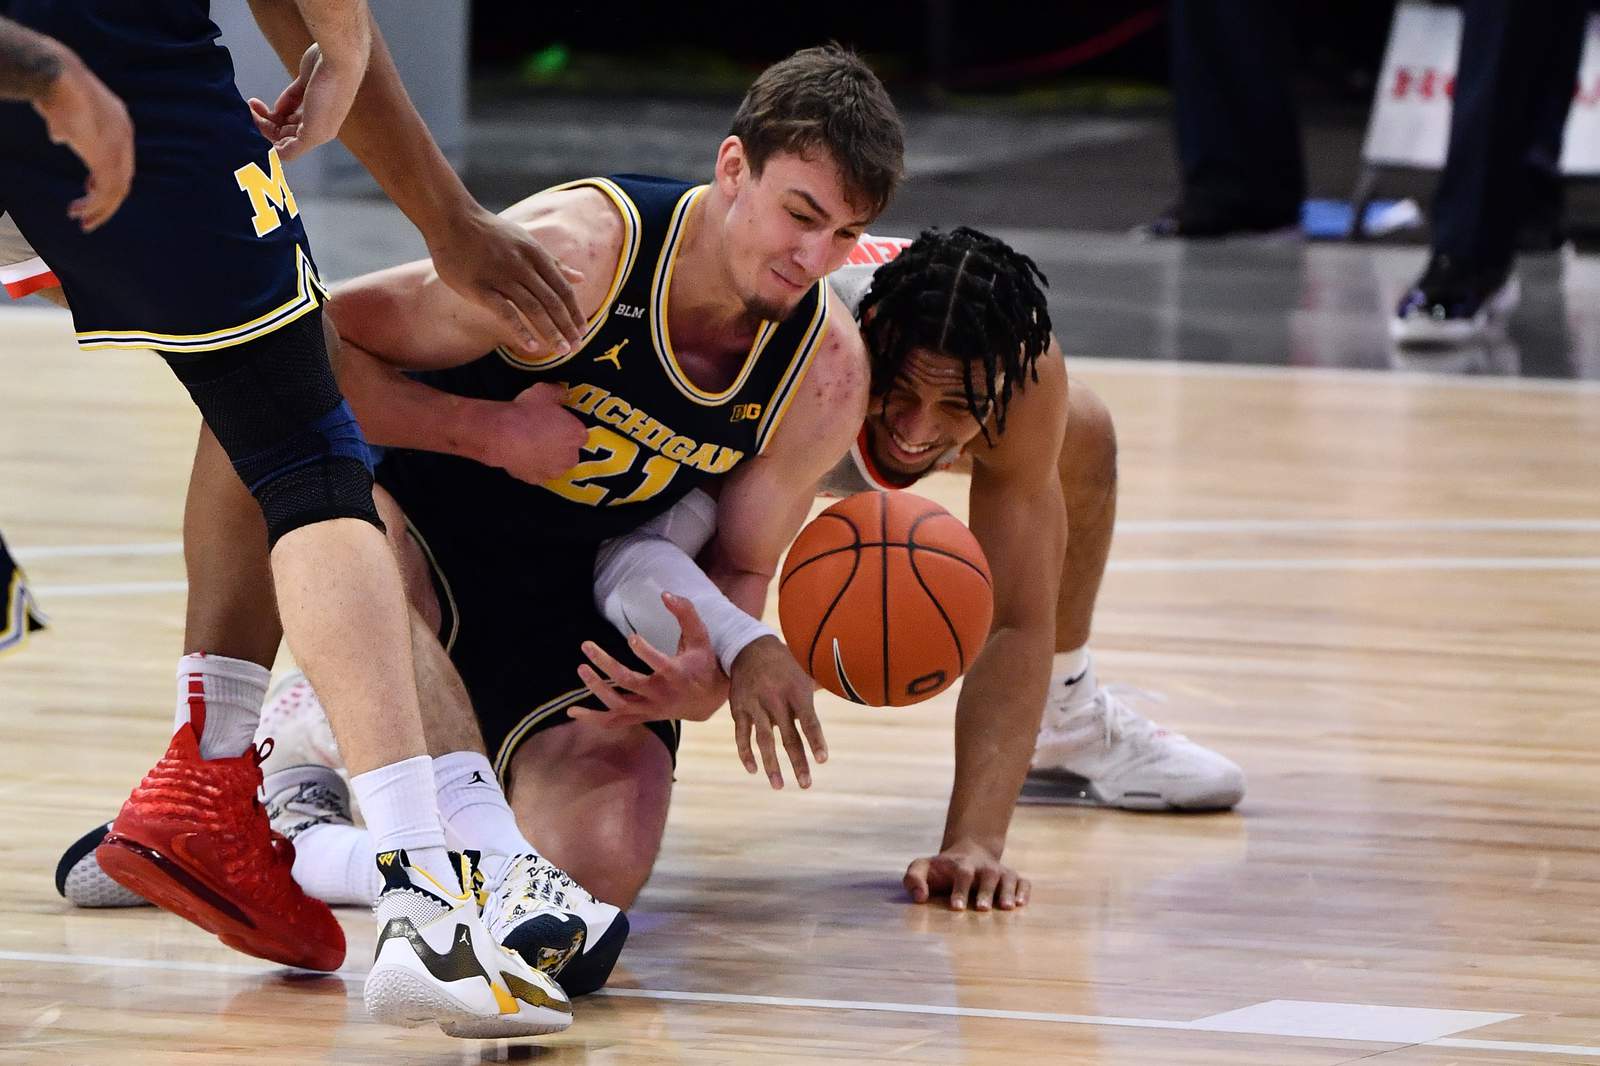 6 differences to expect if Michigan basketball meets Ohio State again in Big Ten Tournament